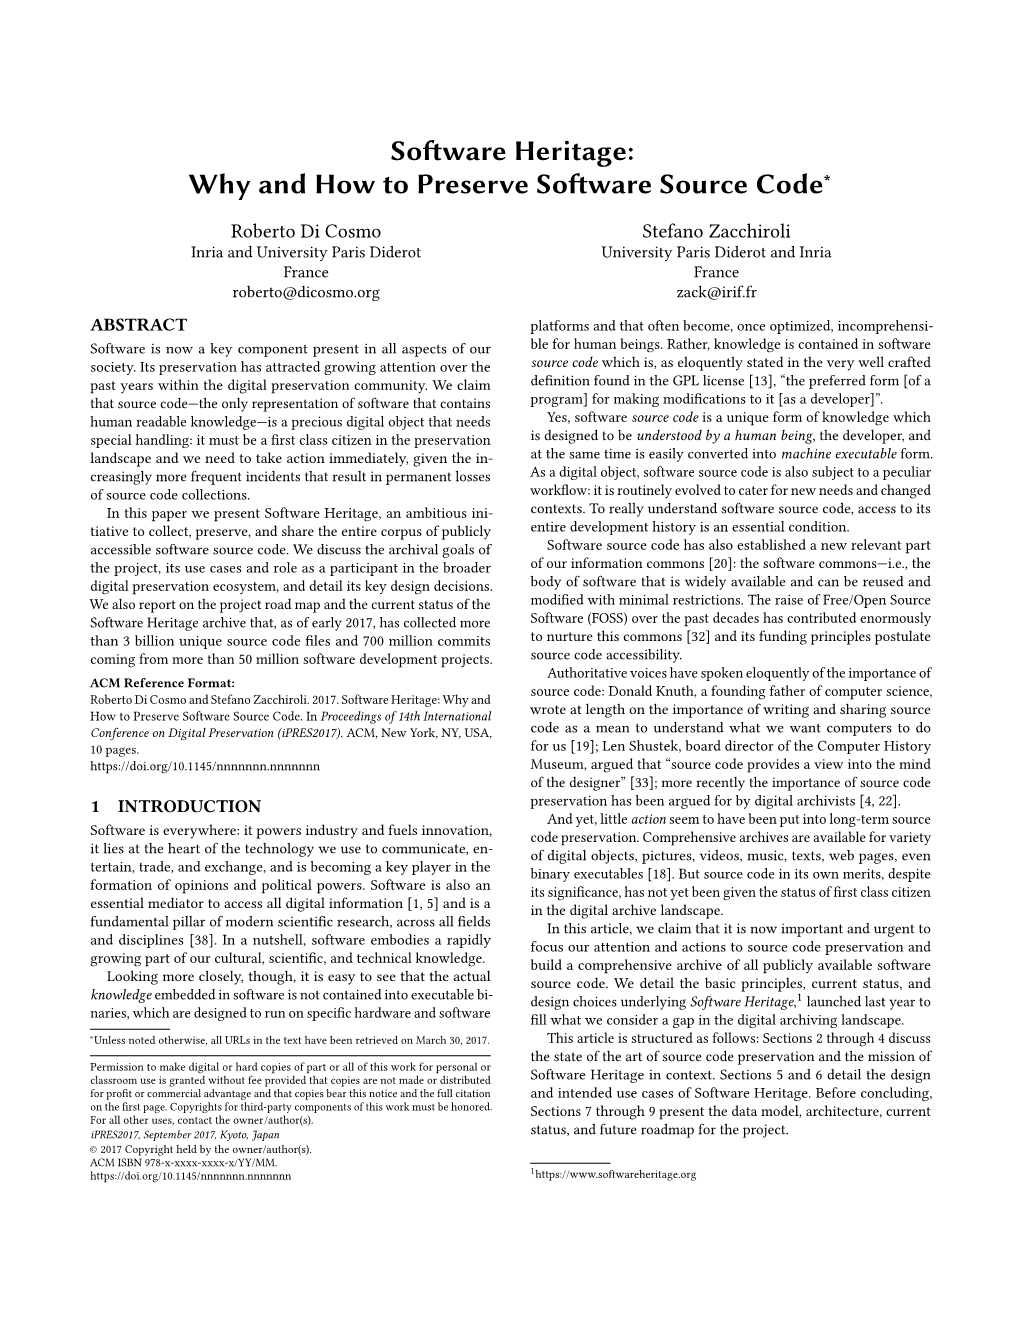 Software Heritage: Why and How to Preserve Software Source Code∗